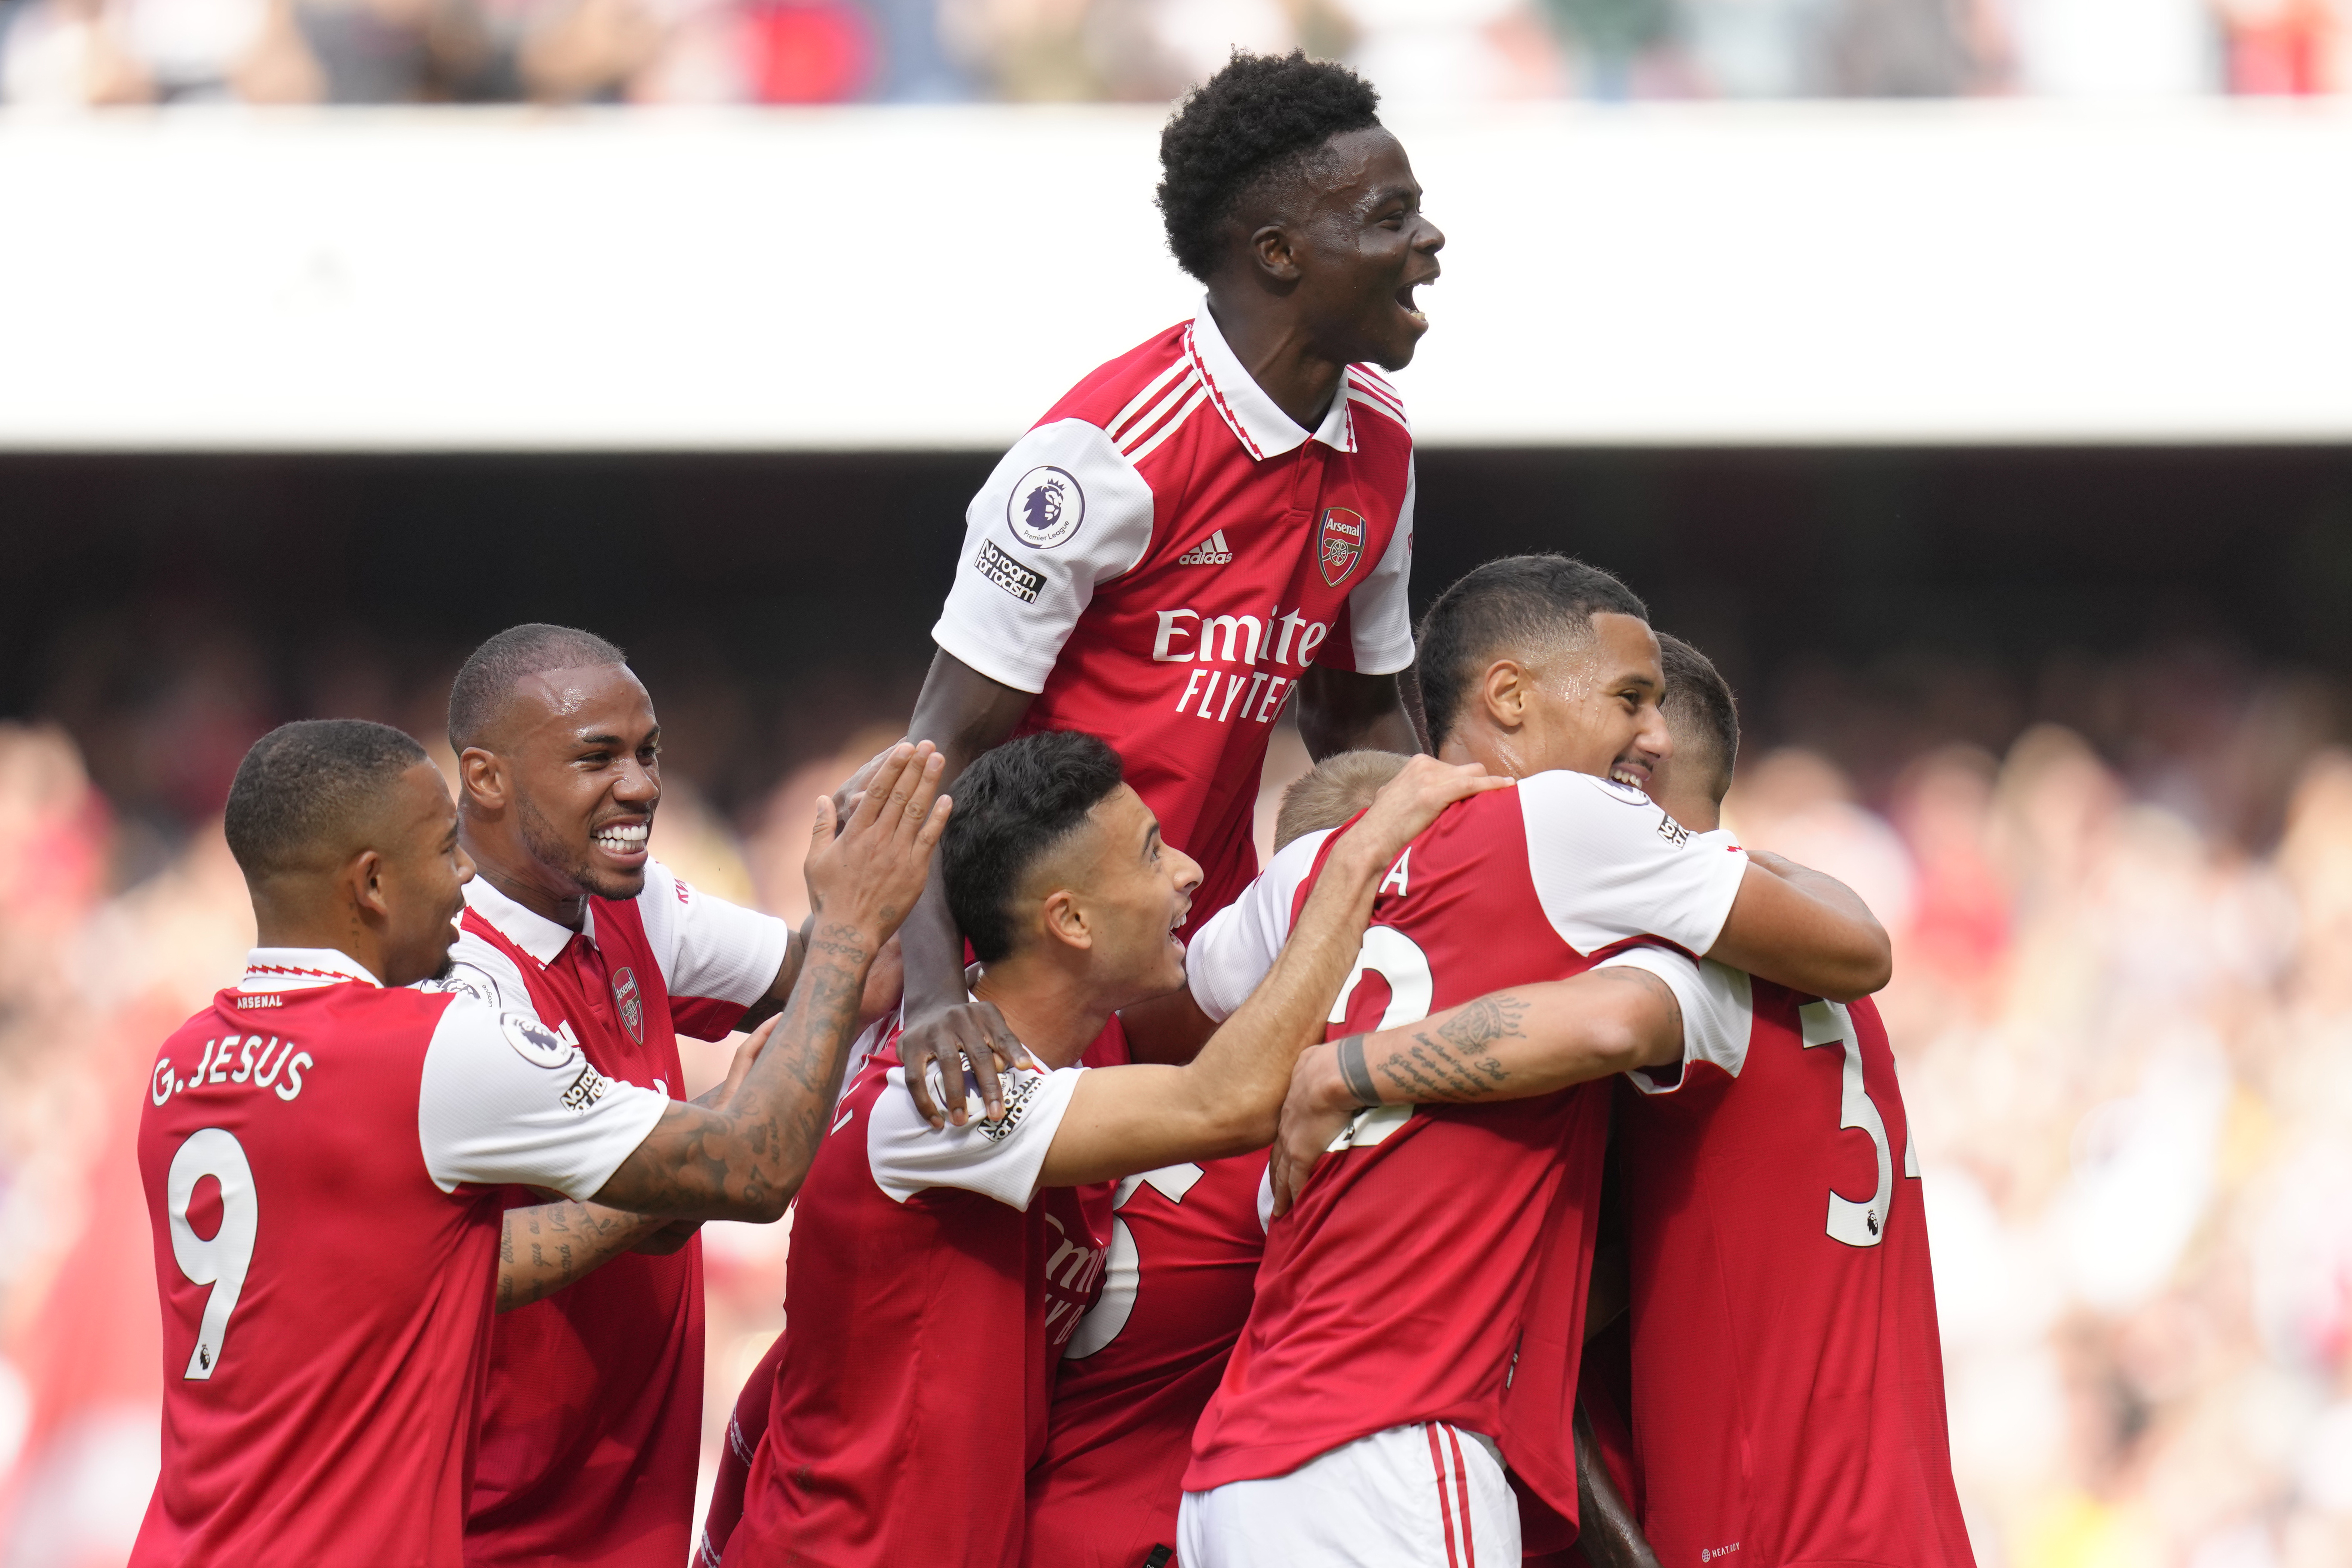 arsenal live stream free online today